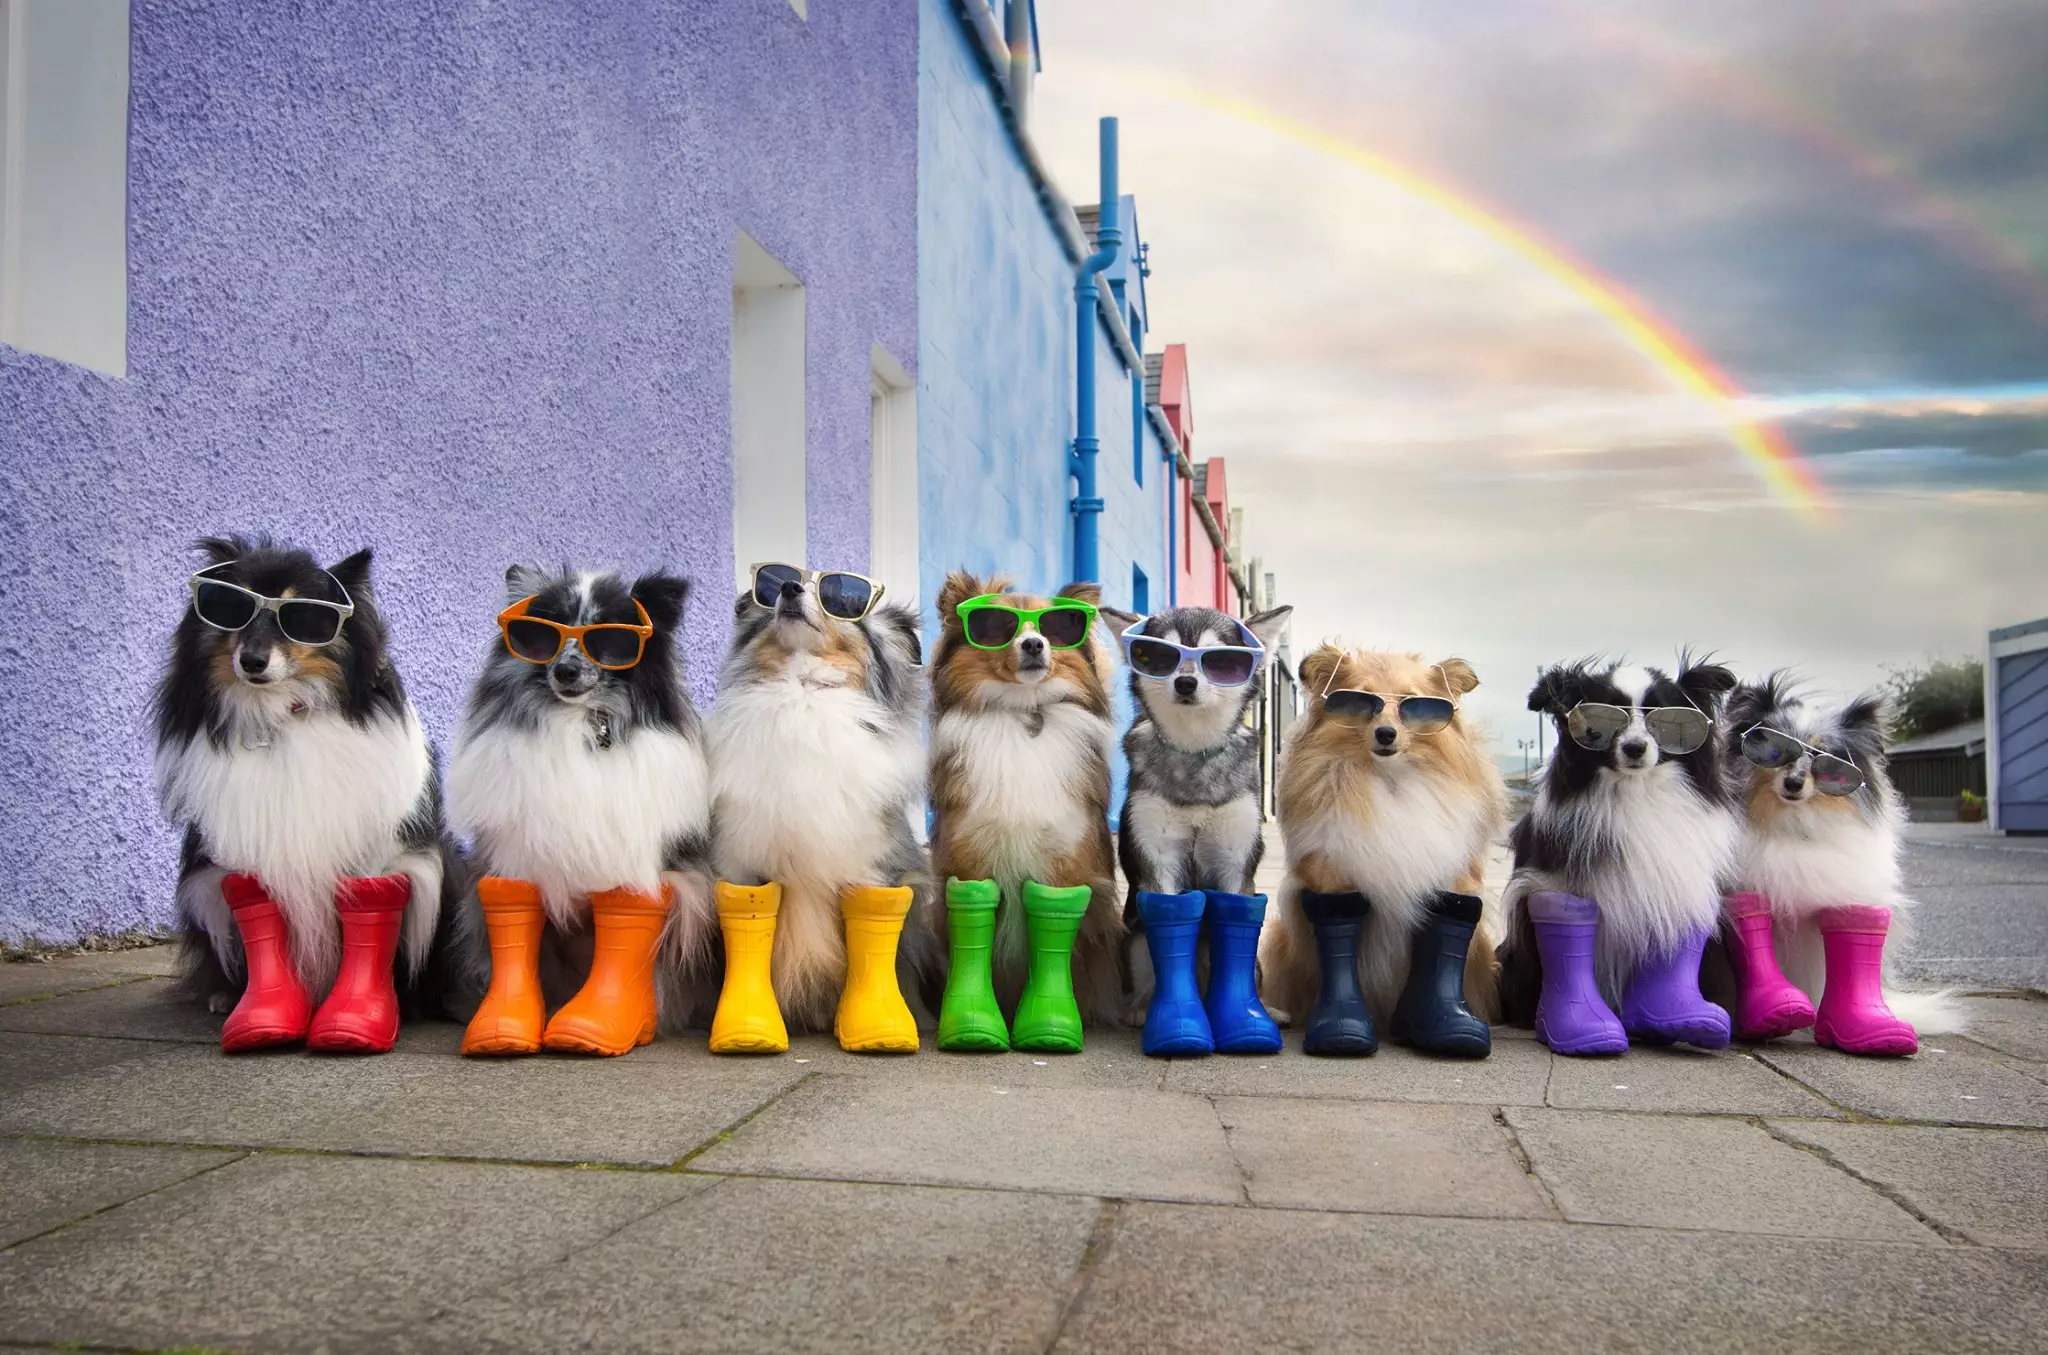 The dogs appearing to wear wellingtons is seriously cute (